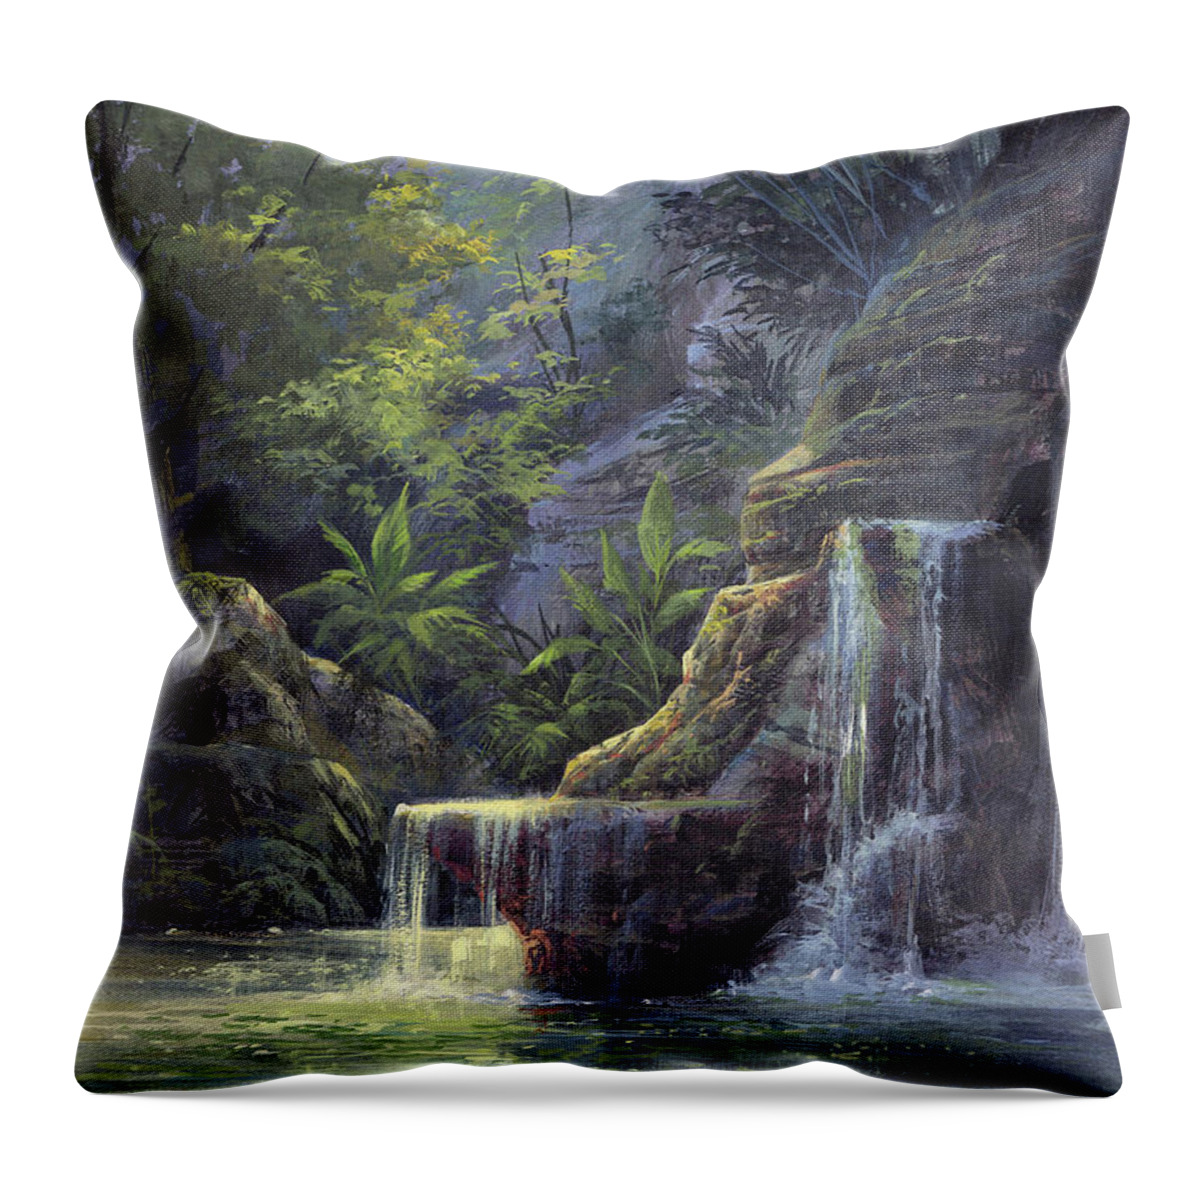 Michael Humphries Throw Pillow featuring the painting Rim Lit Falls by Michael Humphries